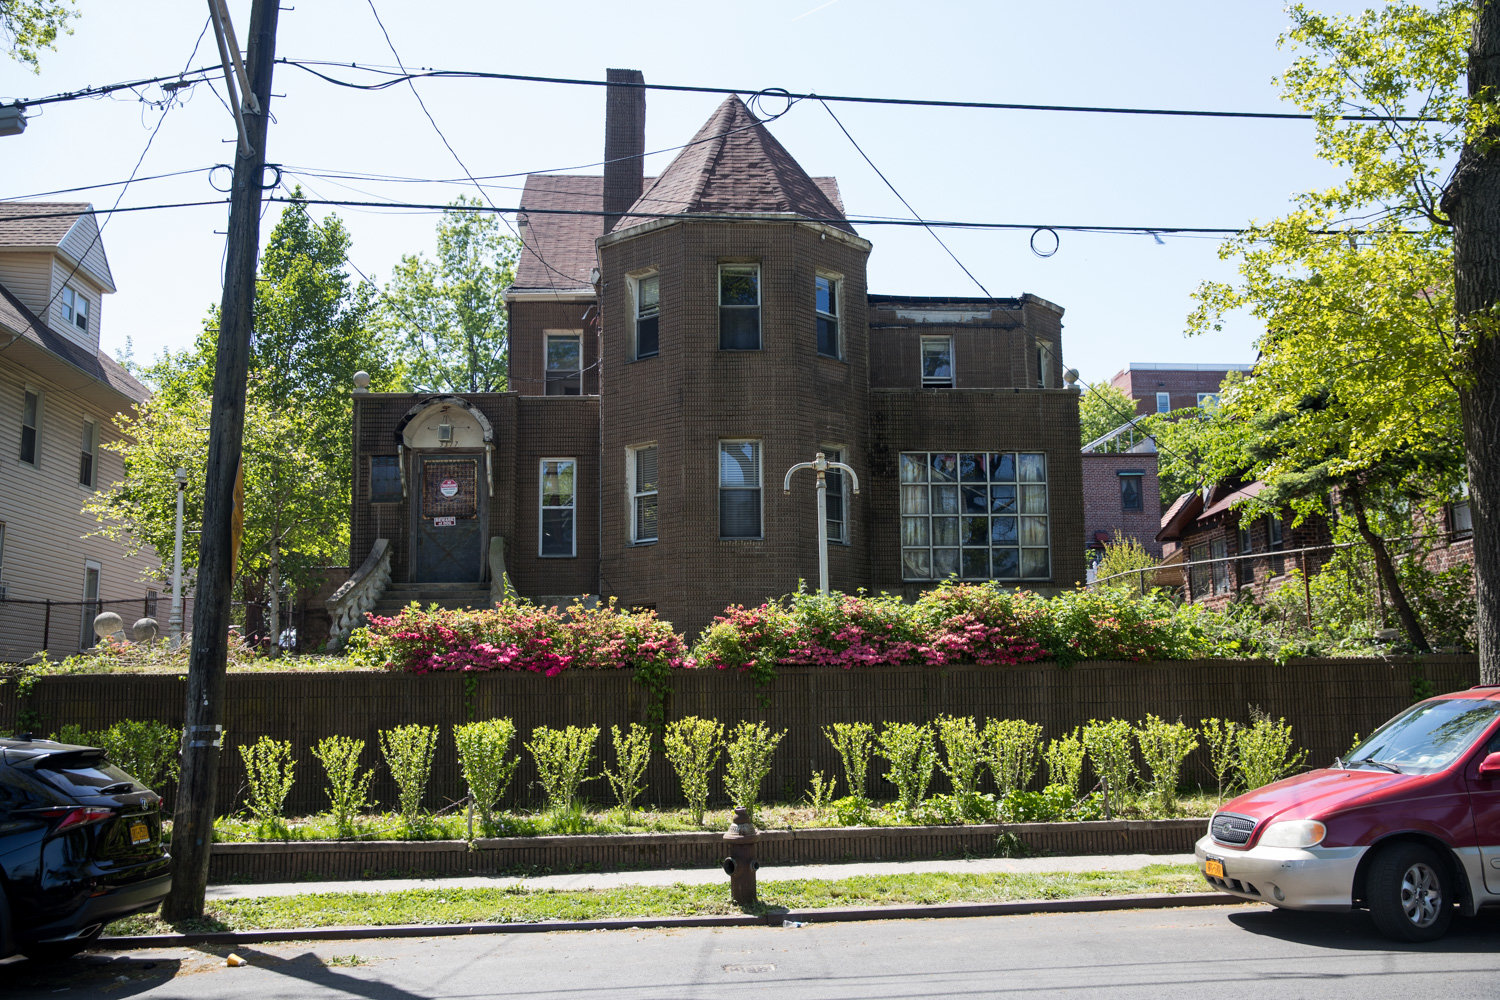 A century-old home on Sedgwick Avenue worth just $31,000 two decades ago sold for $1.25 million earlier this month, prompting speculation it will be raised for an apartment building that could climb as high as eight stories, based on current zoning.